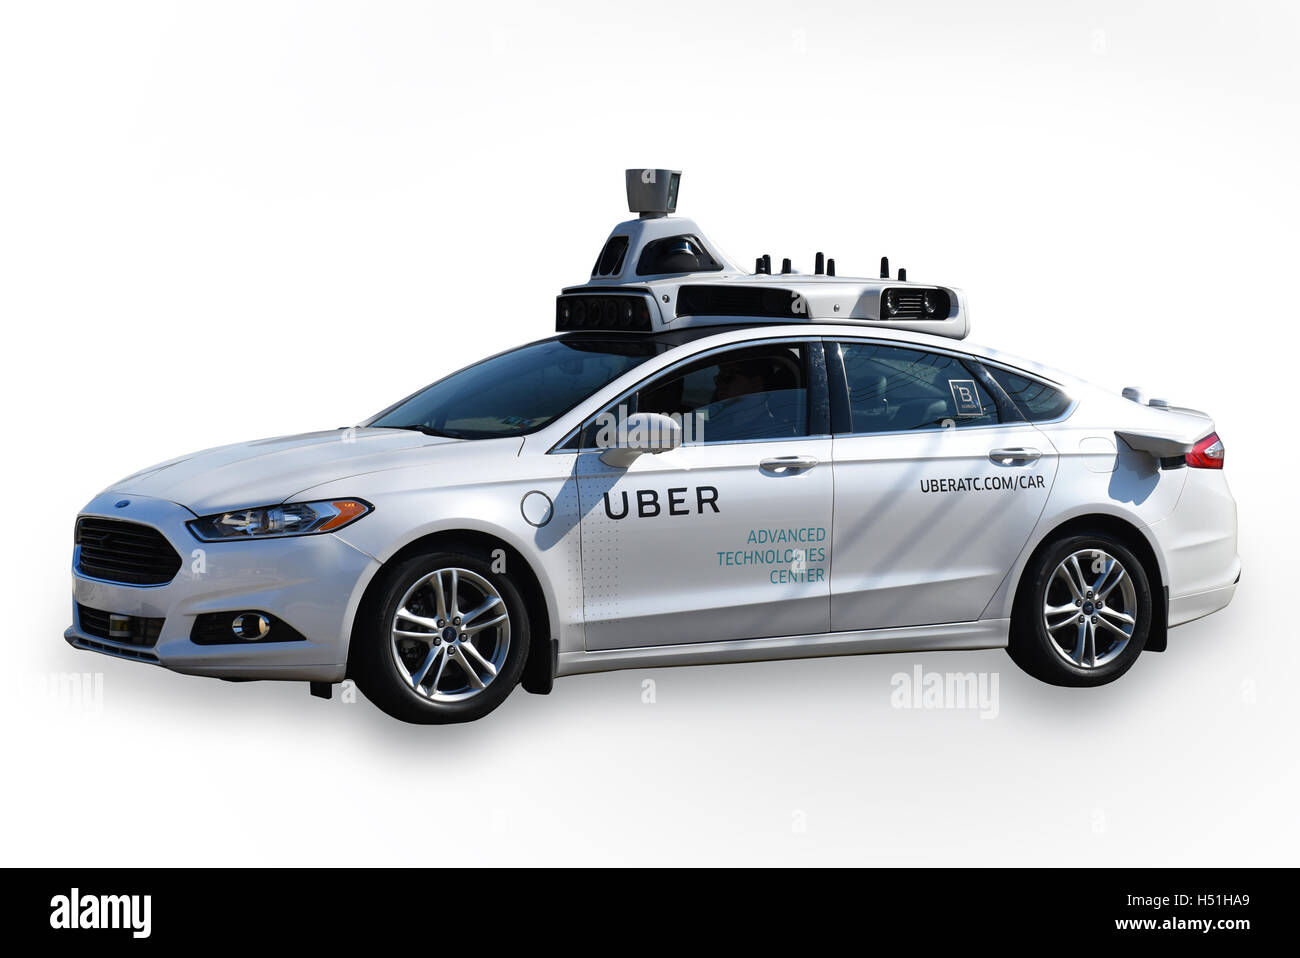 A Driverless Self Driving car being tested by Uber the taxi service company in Pittsburgh, PA cut out Stock Photo